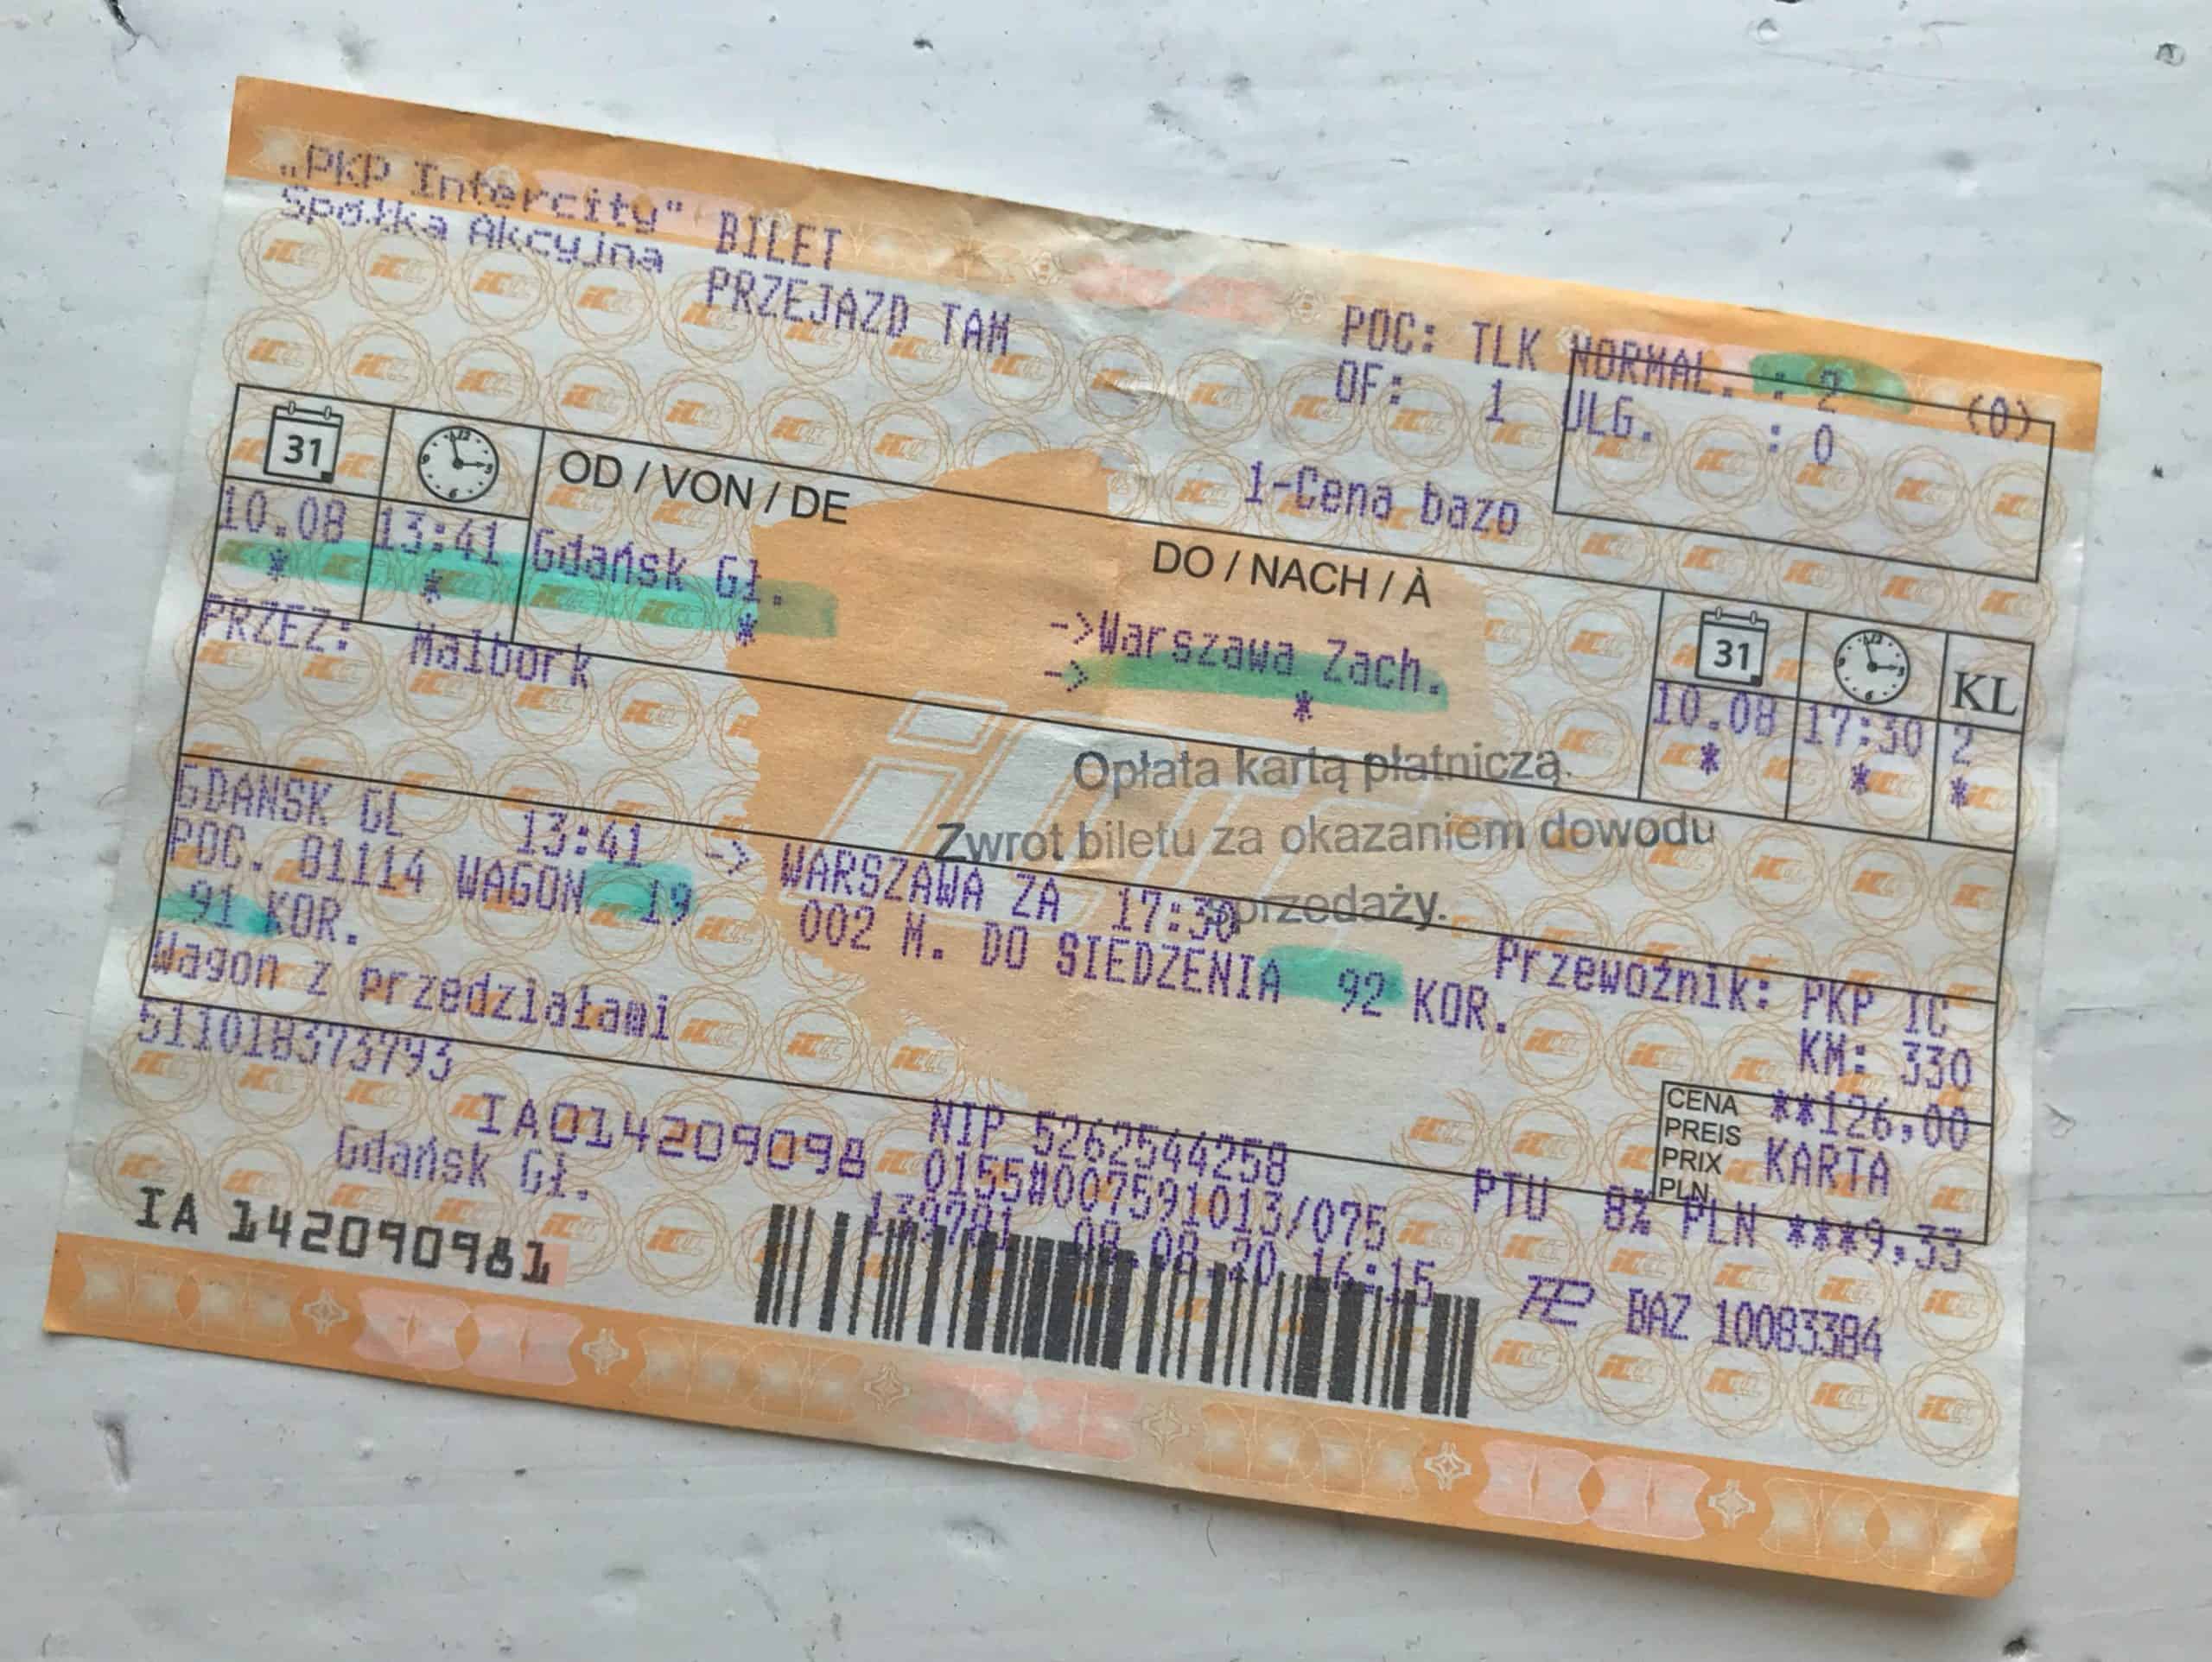 Polish train tickets are easy to buy at the station